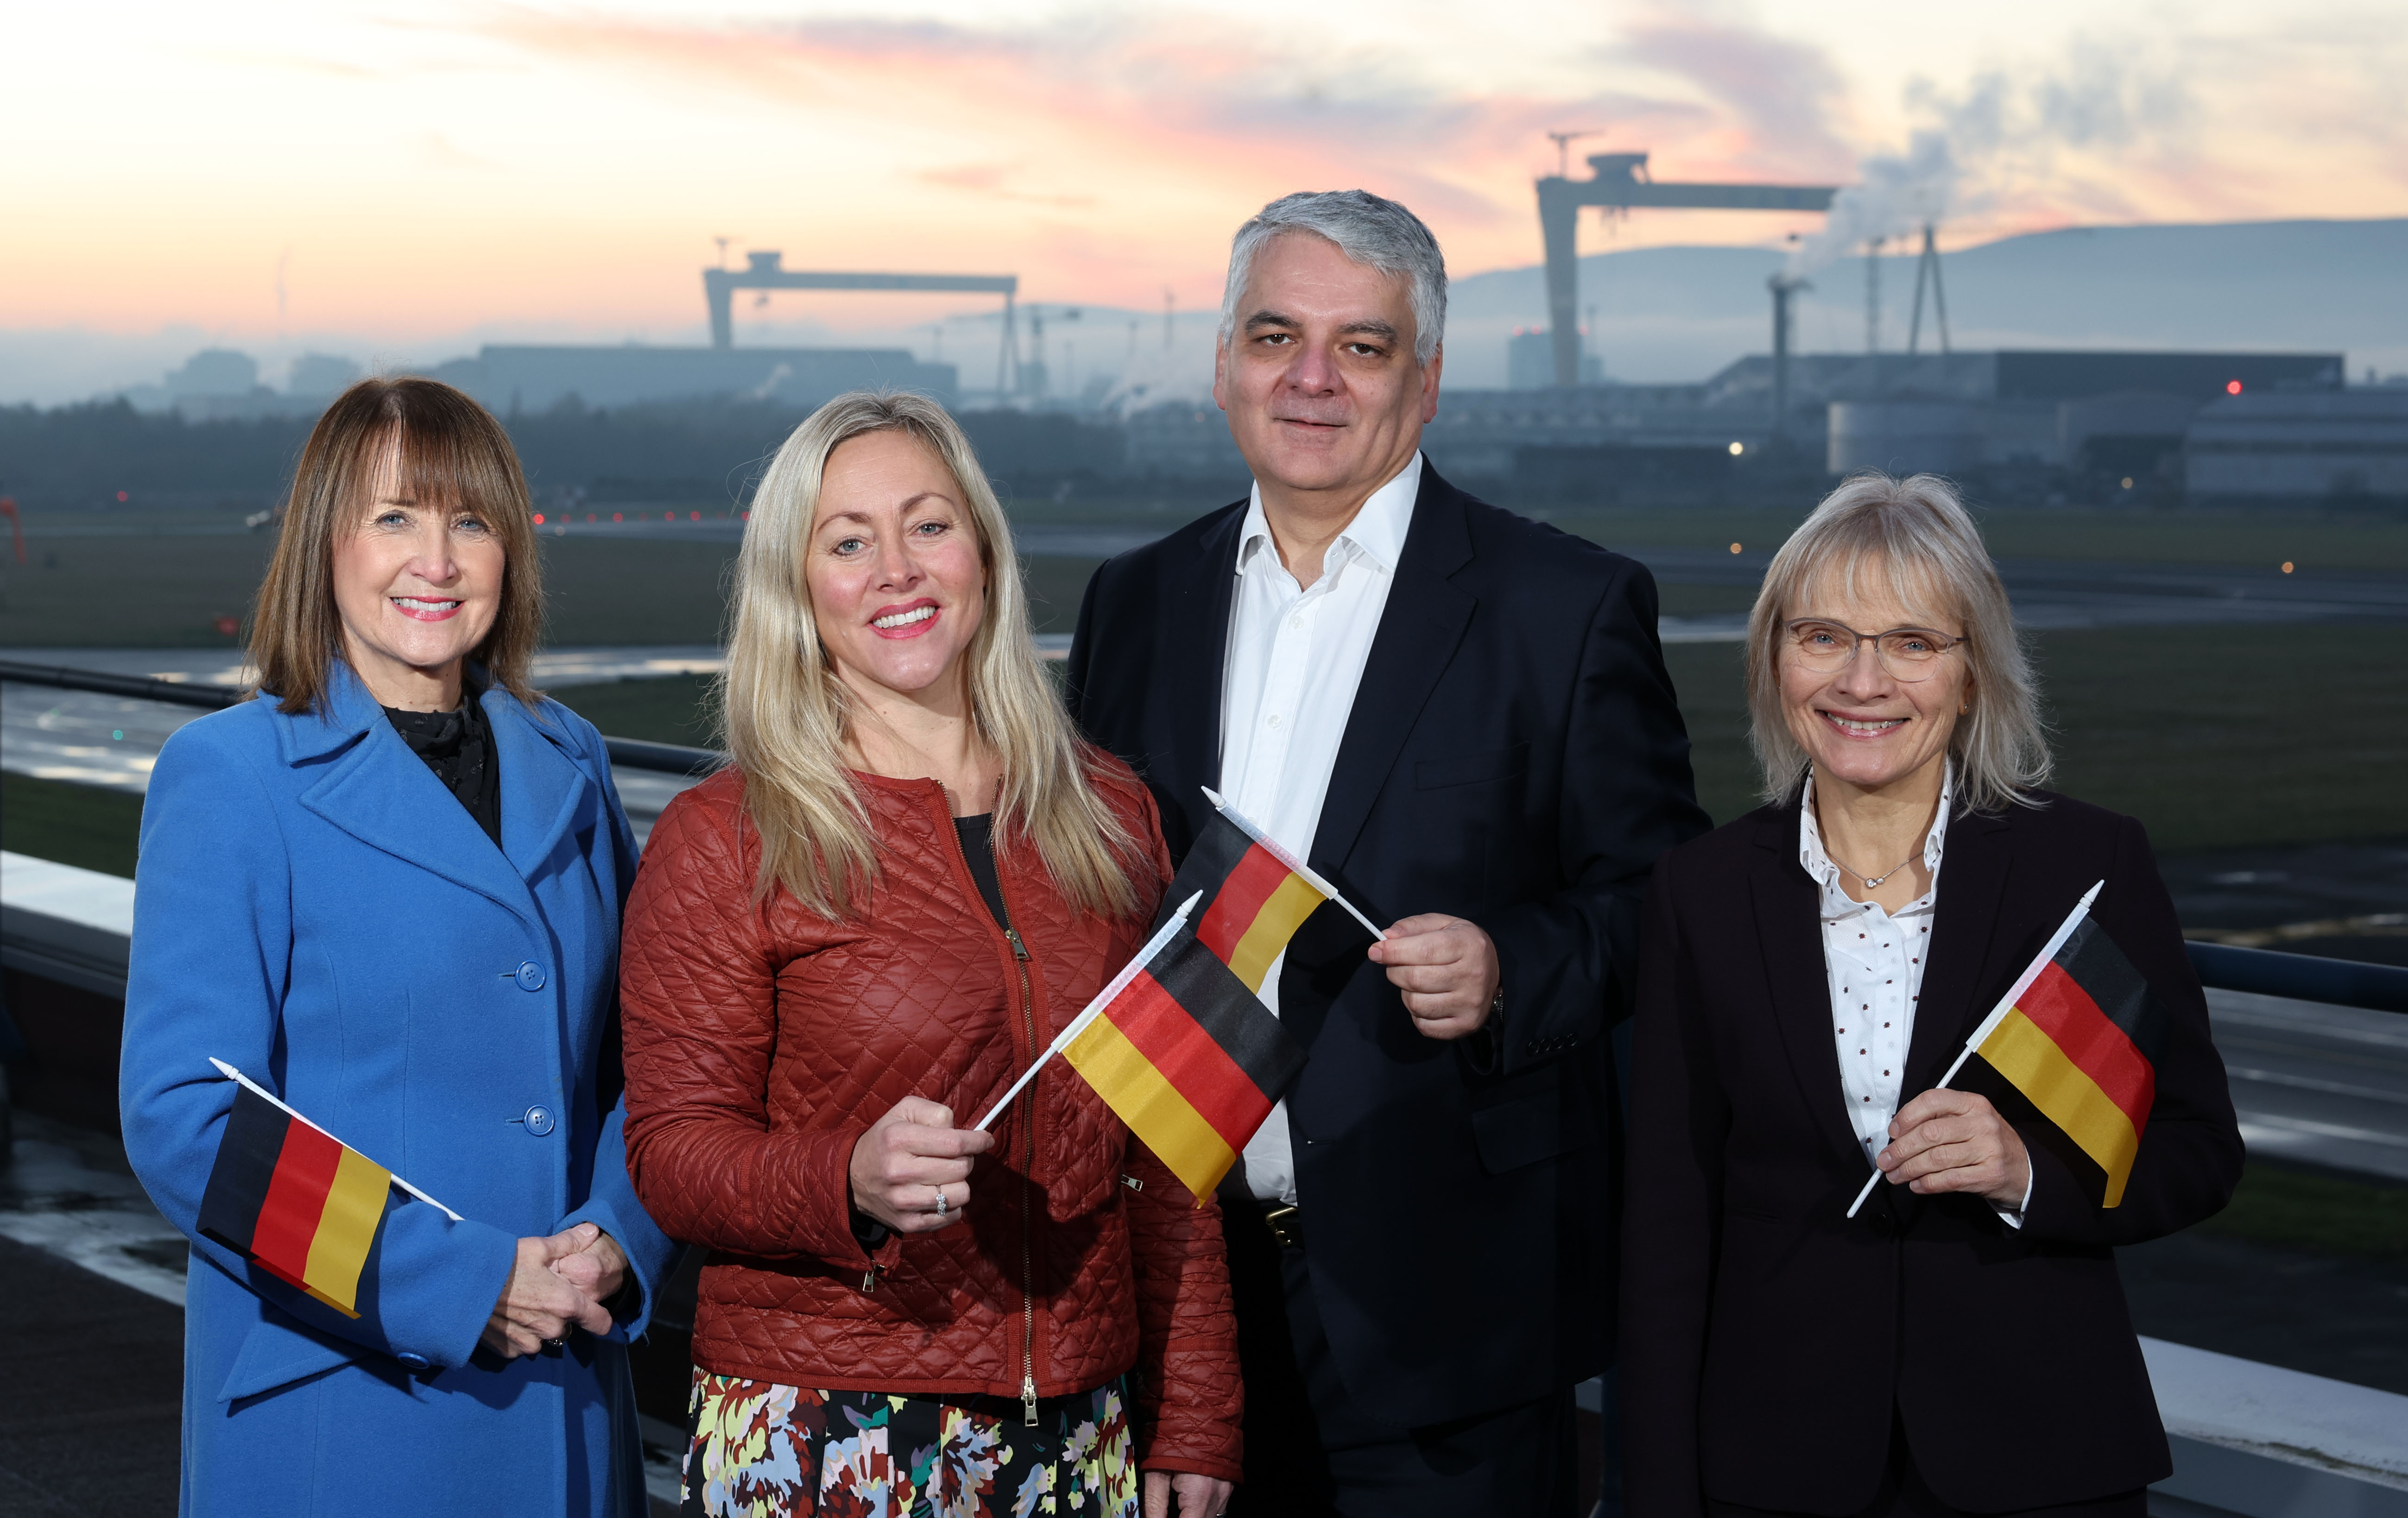 Germany’s flag carrier airline, Lufthansa, has announced it will commence operations at Belfast City Airport.